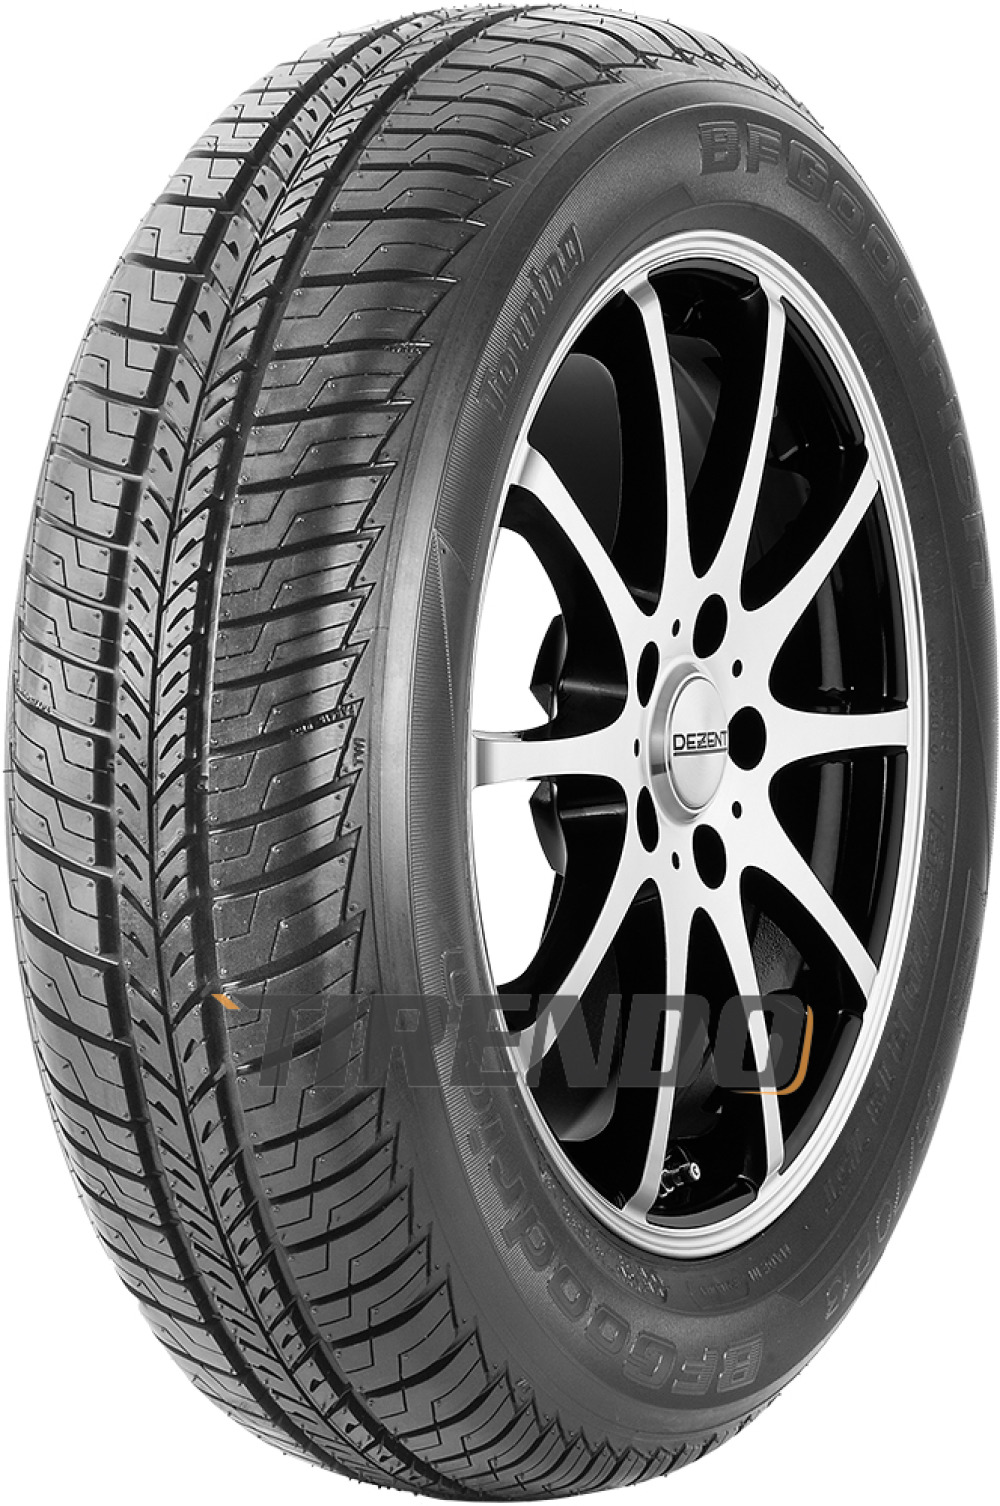 Image of        BF Goodrich Touring ( 165/70 R13 79T )